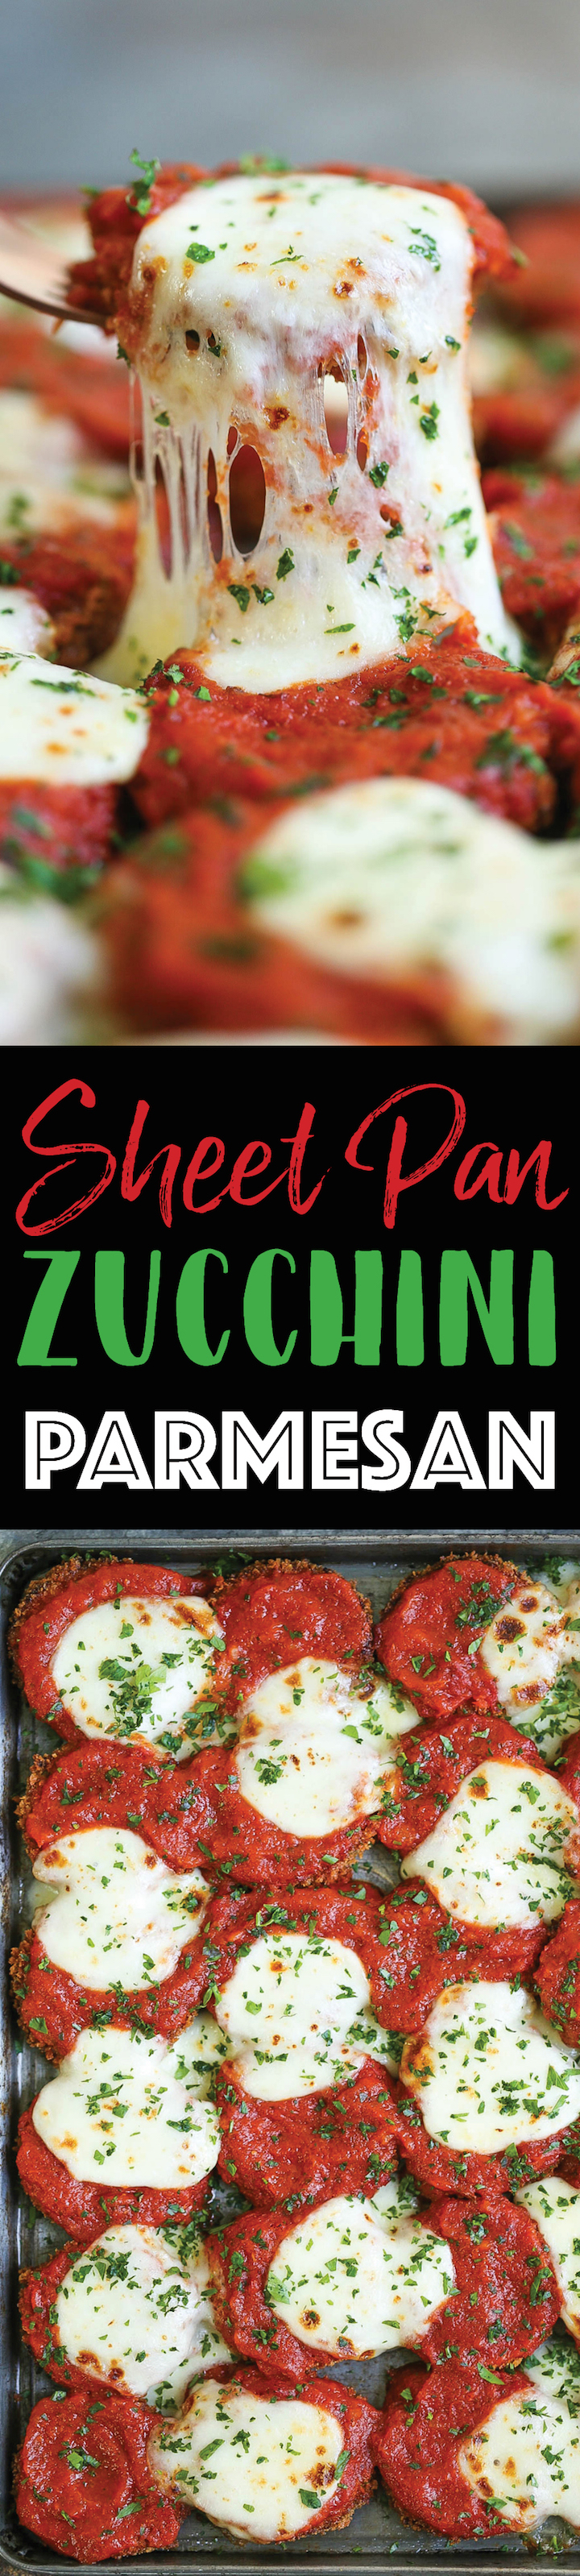 Sheet Pan Zucchini Parmesan - Everyone's favorite chicken parmesan except made HEALTHIER! Use zucchini instead baked to perfection with marinara and cheese!